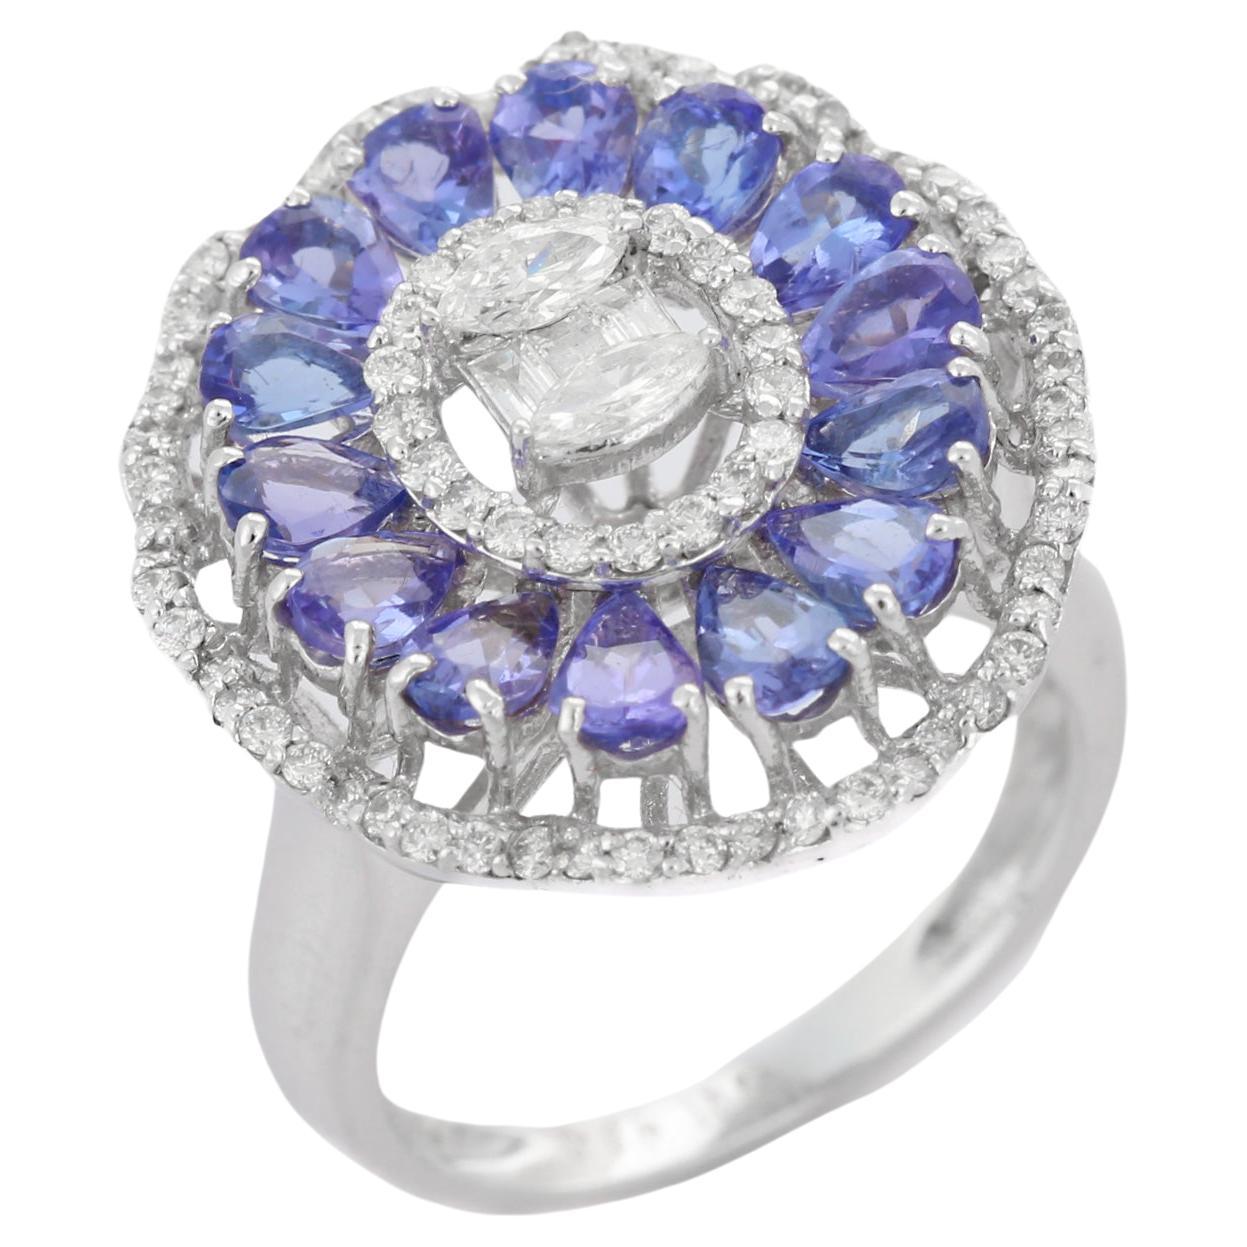 For Sale:  18K White Gold 2.26 ct Blue Sapphire Floral Cocktail Wedding Ring with Diamonds